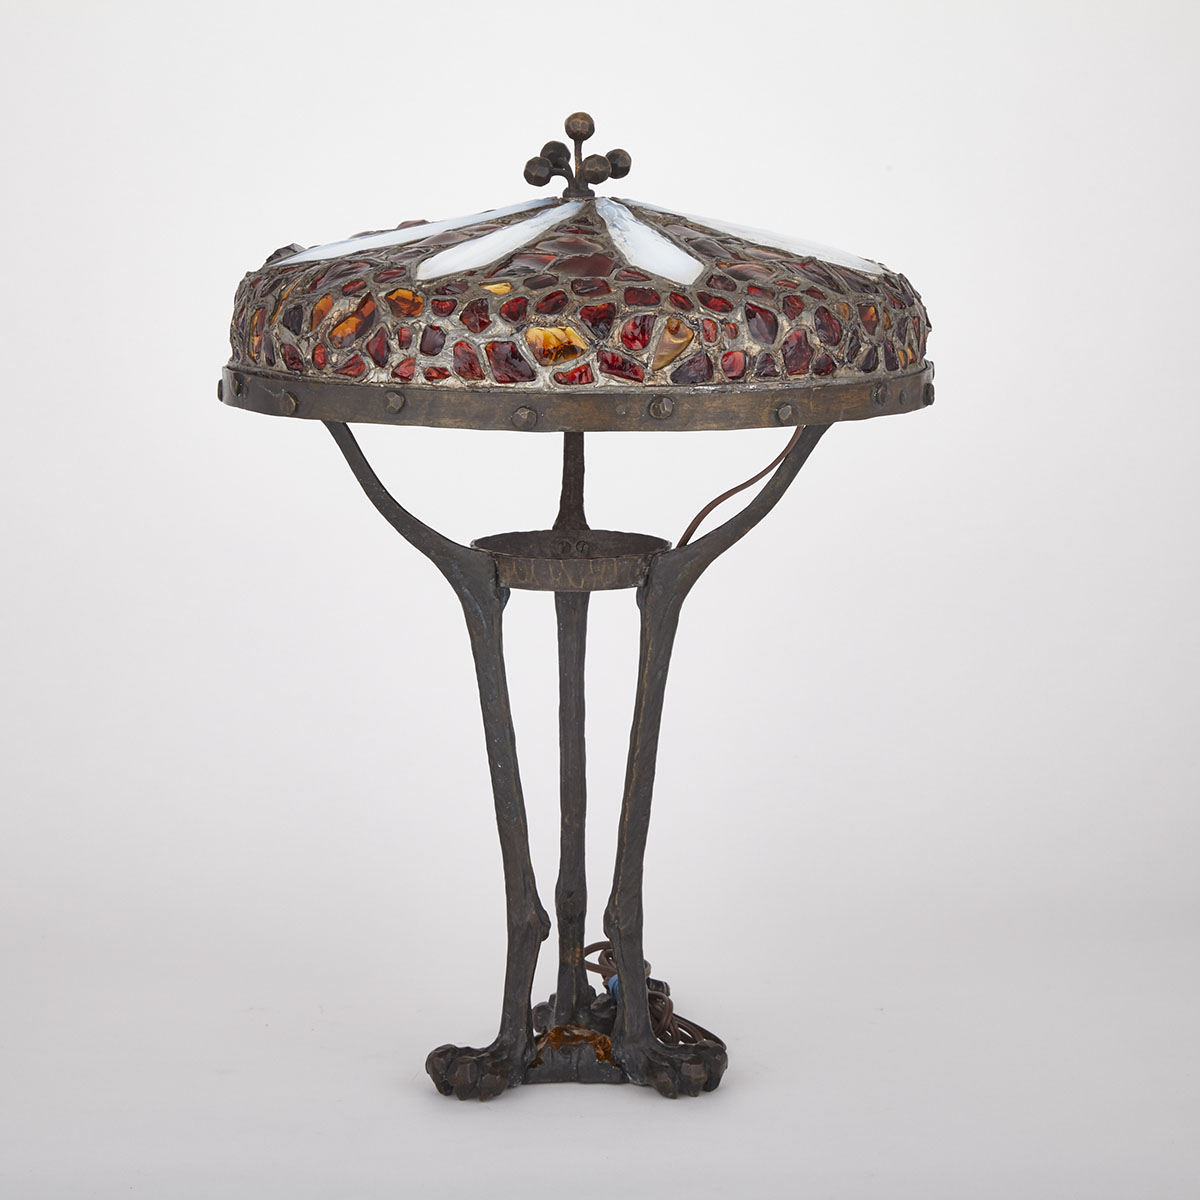 Austrian Patinated Bronze and Glass ‘Chunk Jewel’ Table Lamp, c.1890